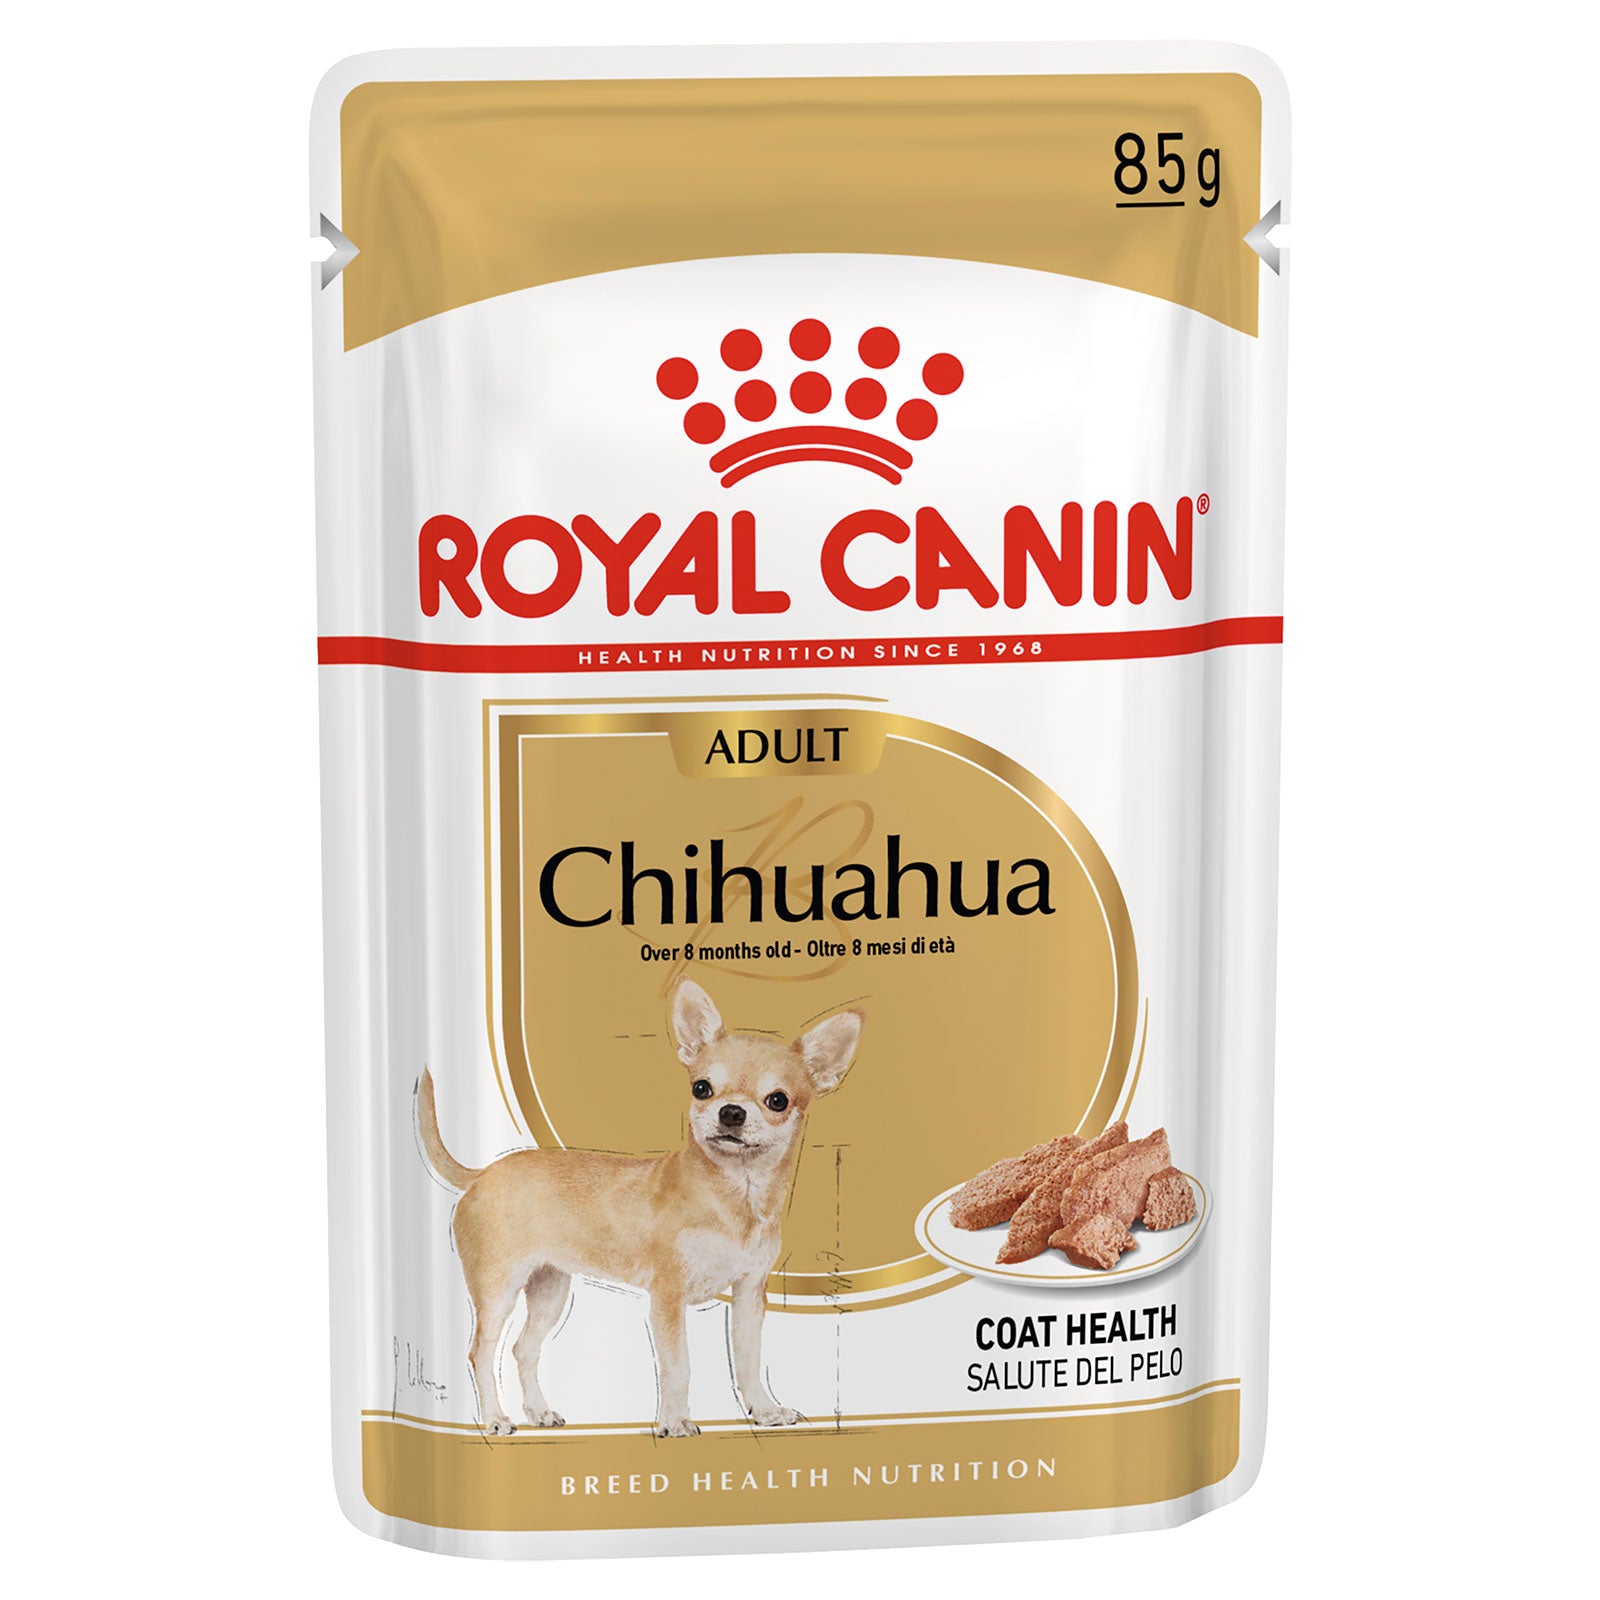 Royal Canin Dog Food Pouch Adult Chihuahua